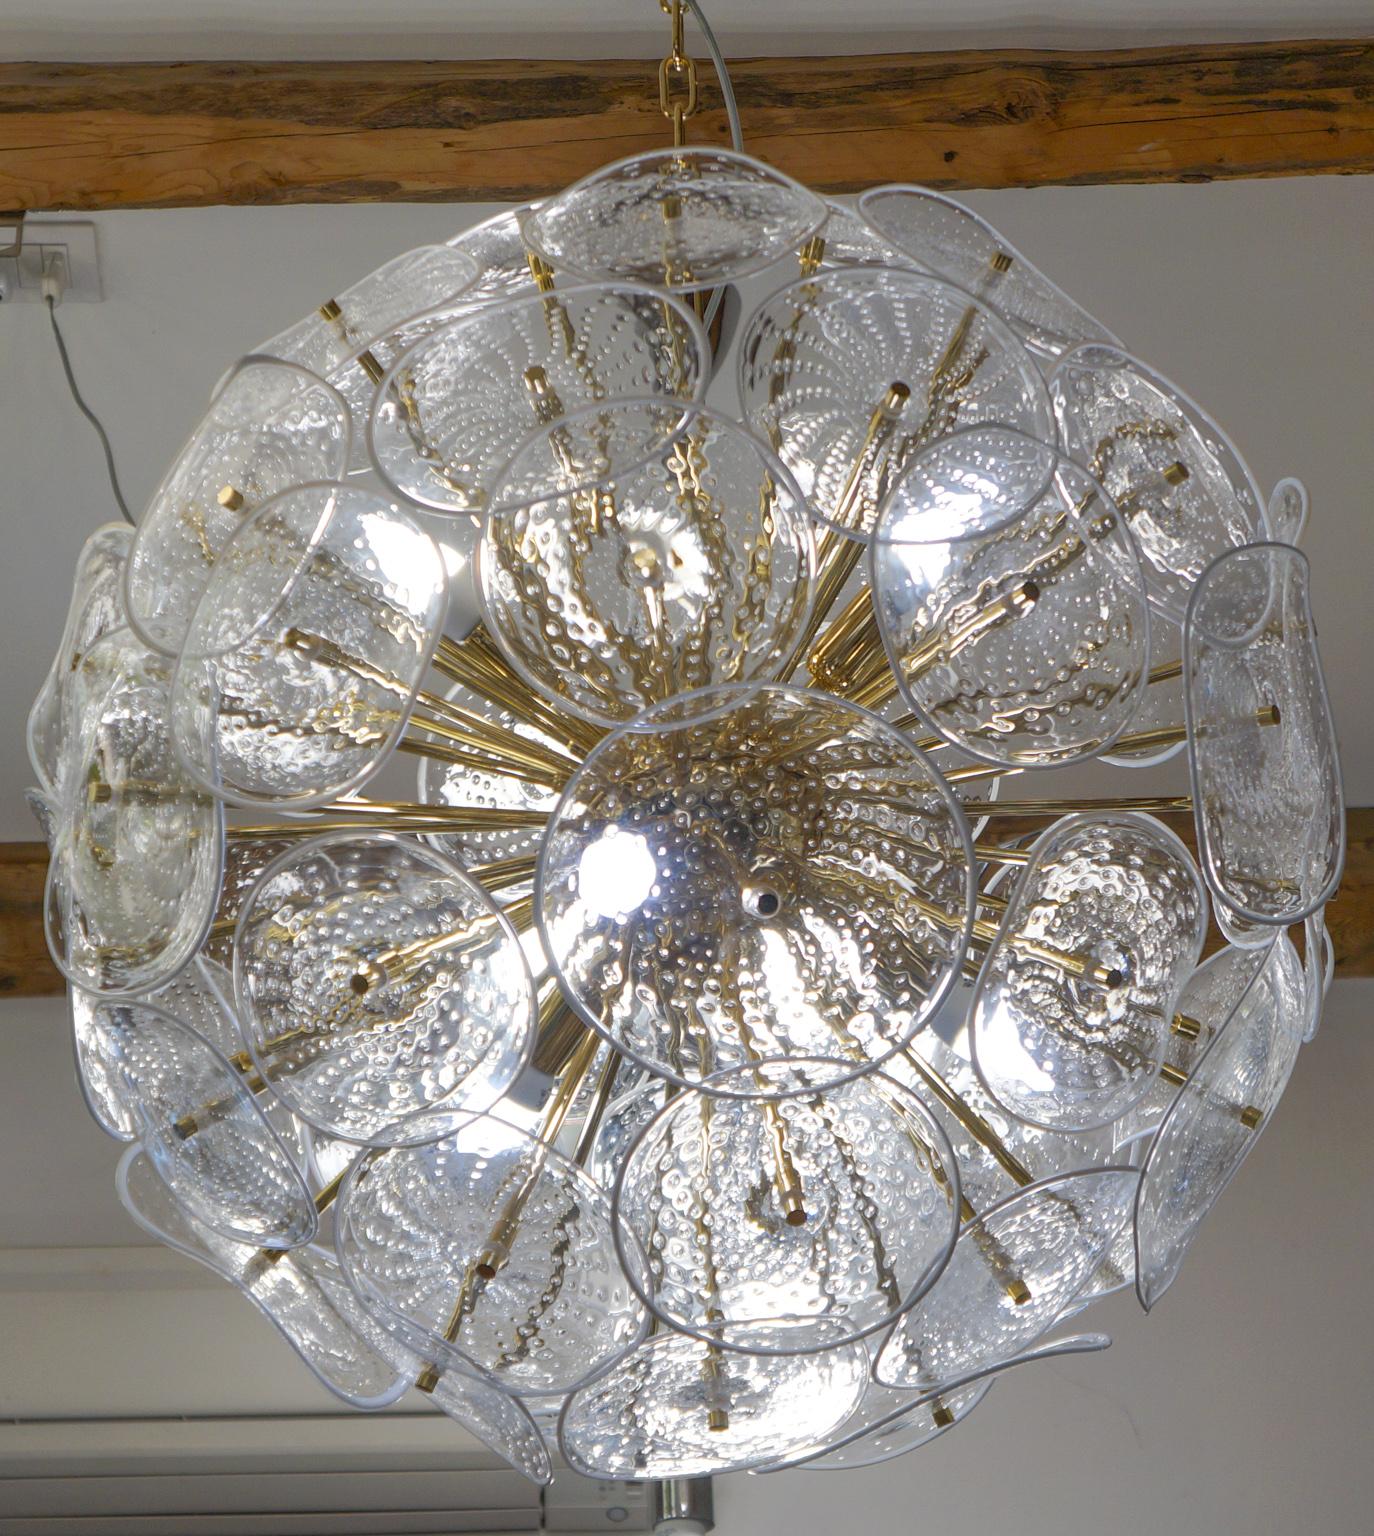 This chandelier is just extraordinary. It is not a Classic chandelier or a usual vintage chandelier.
This Sputnik is a magnificent creation that conquers us with its extravagance. It is a revisited vintage chandelier, where the elements are not